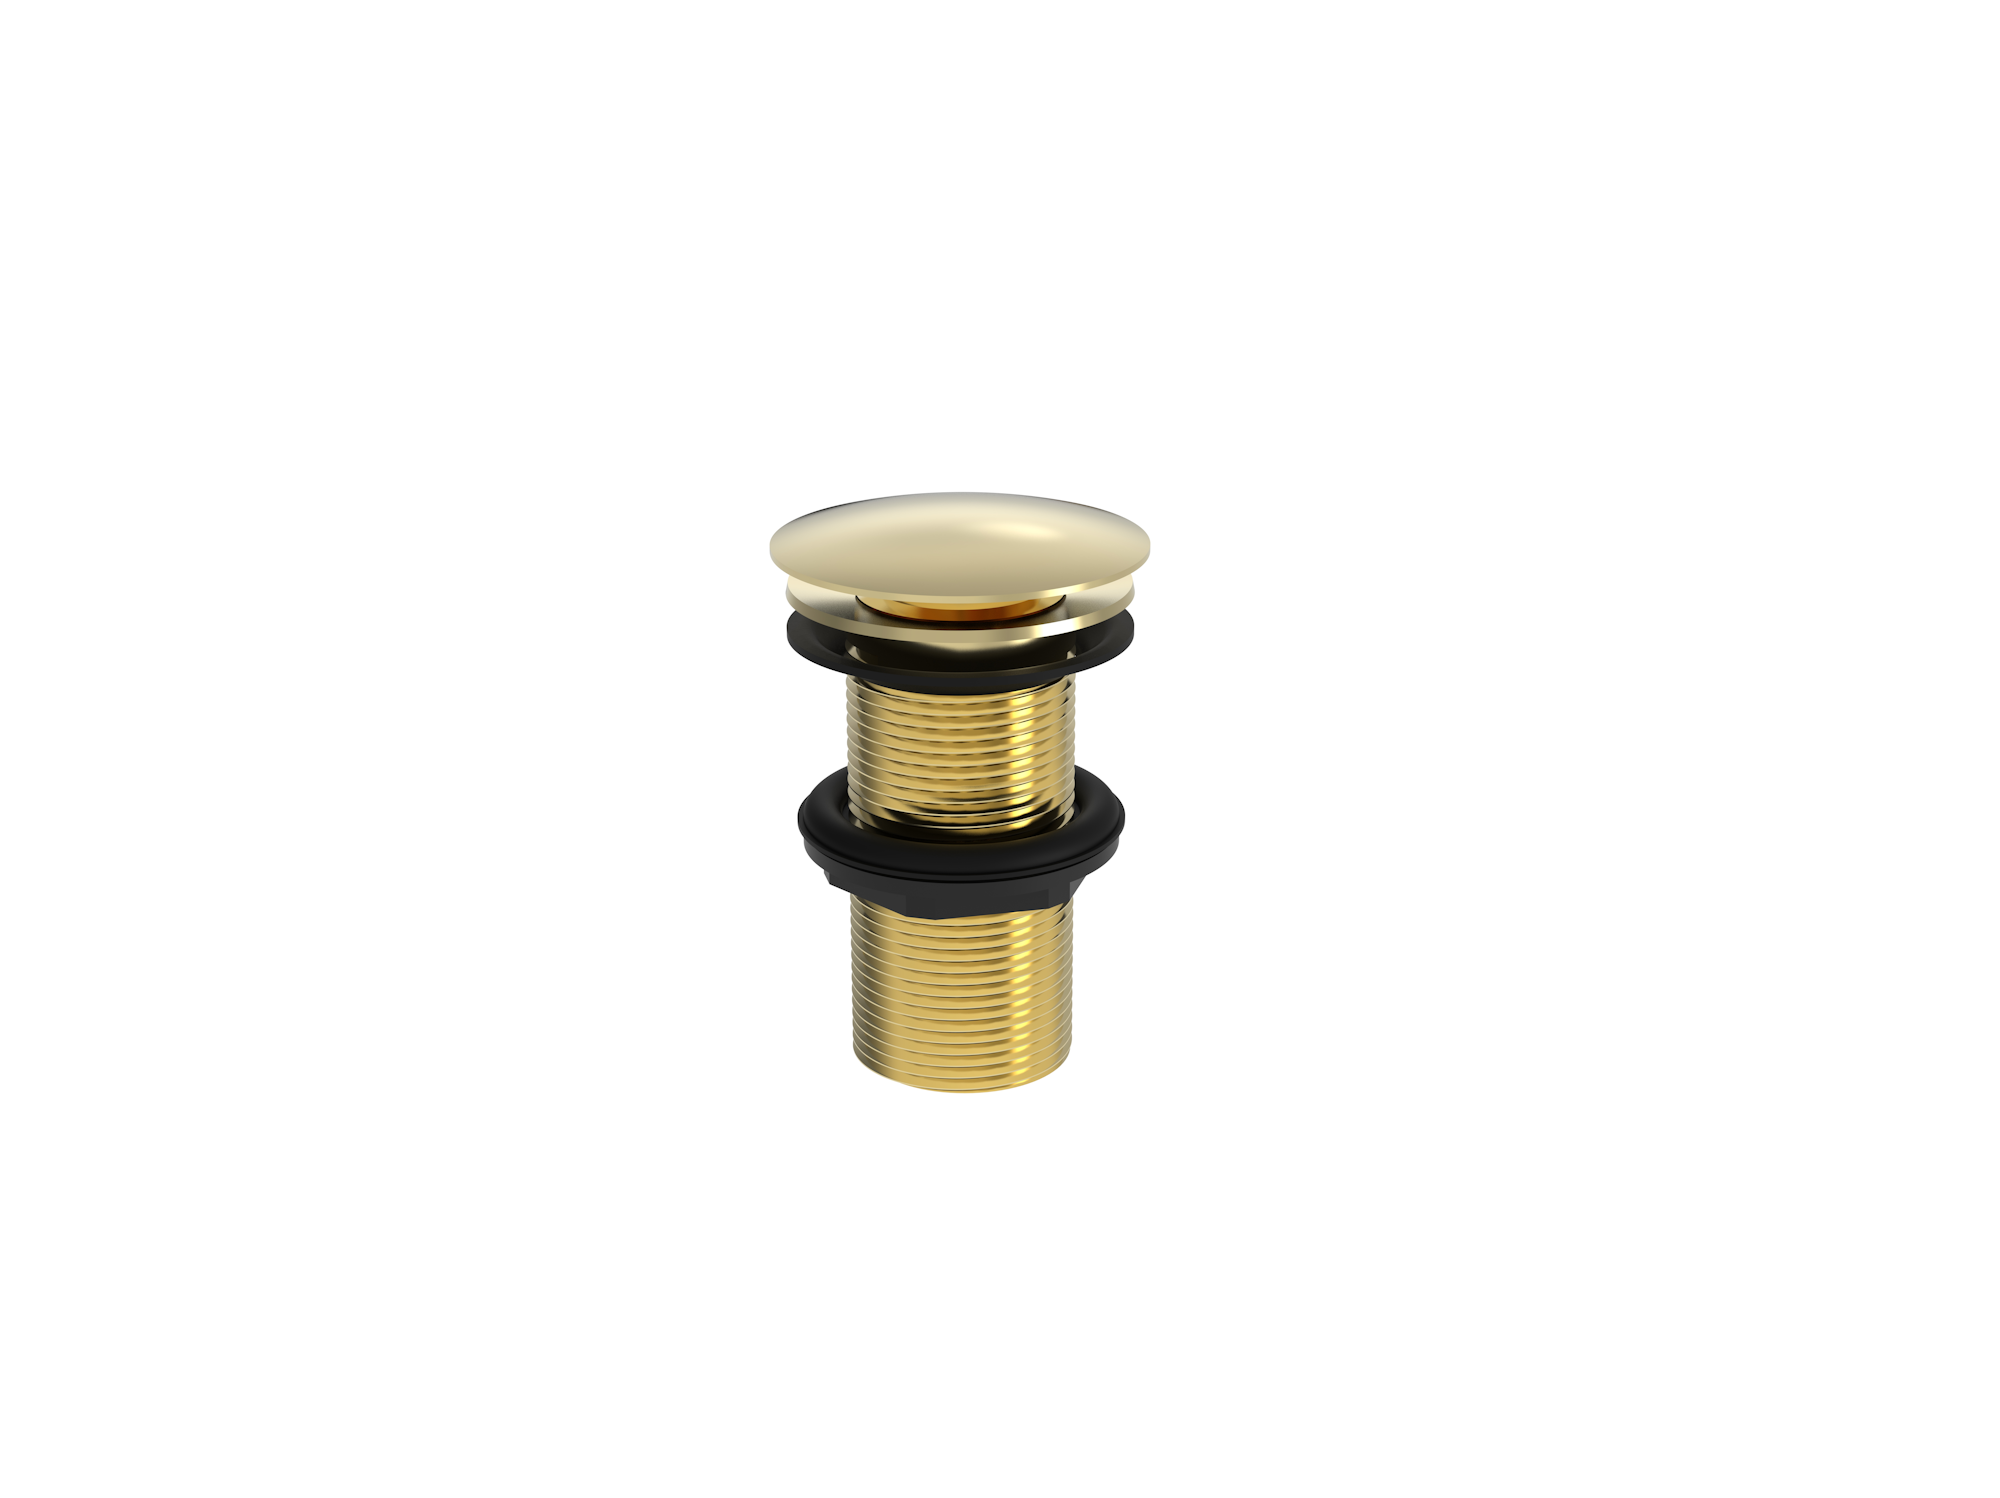 1 1/4" round clicker unslotted waste - Brushed Brass